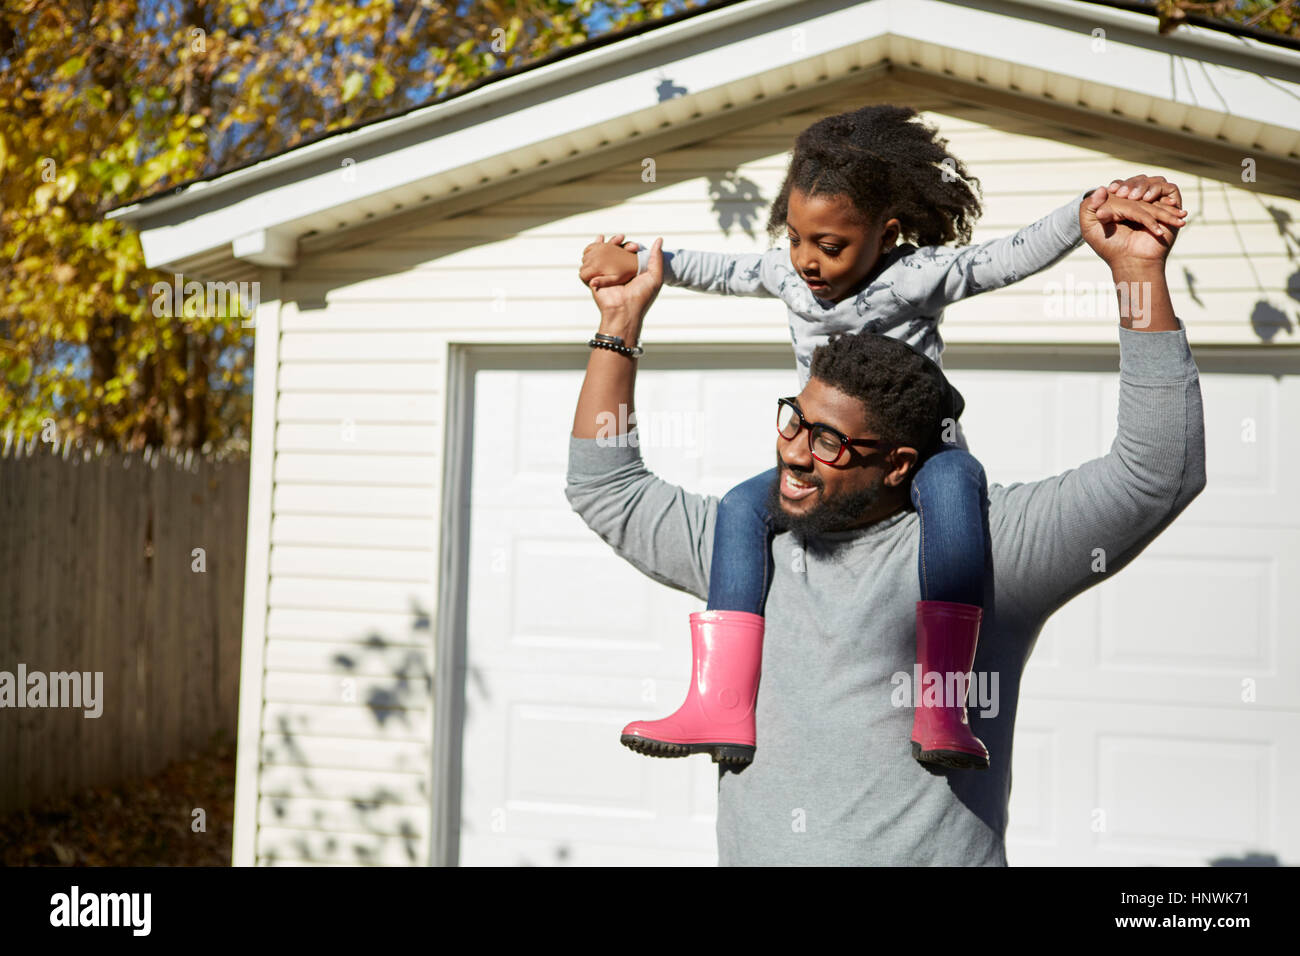 Mature man carrying daughter on shoulders by residential garage Stock Photo